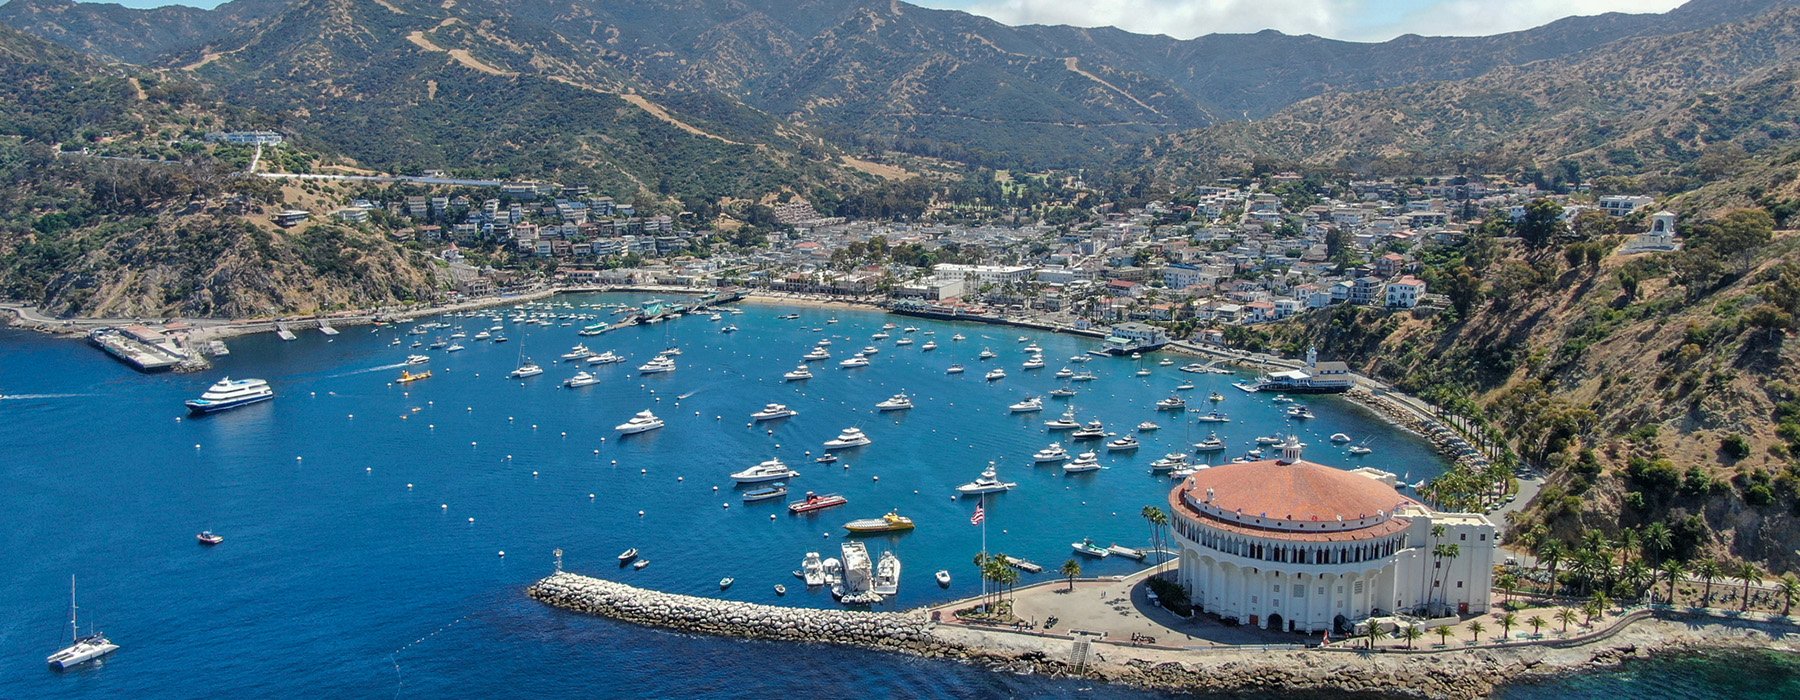 aerial view of Avalon and Catalina Casino 